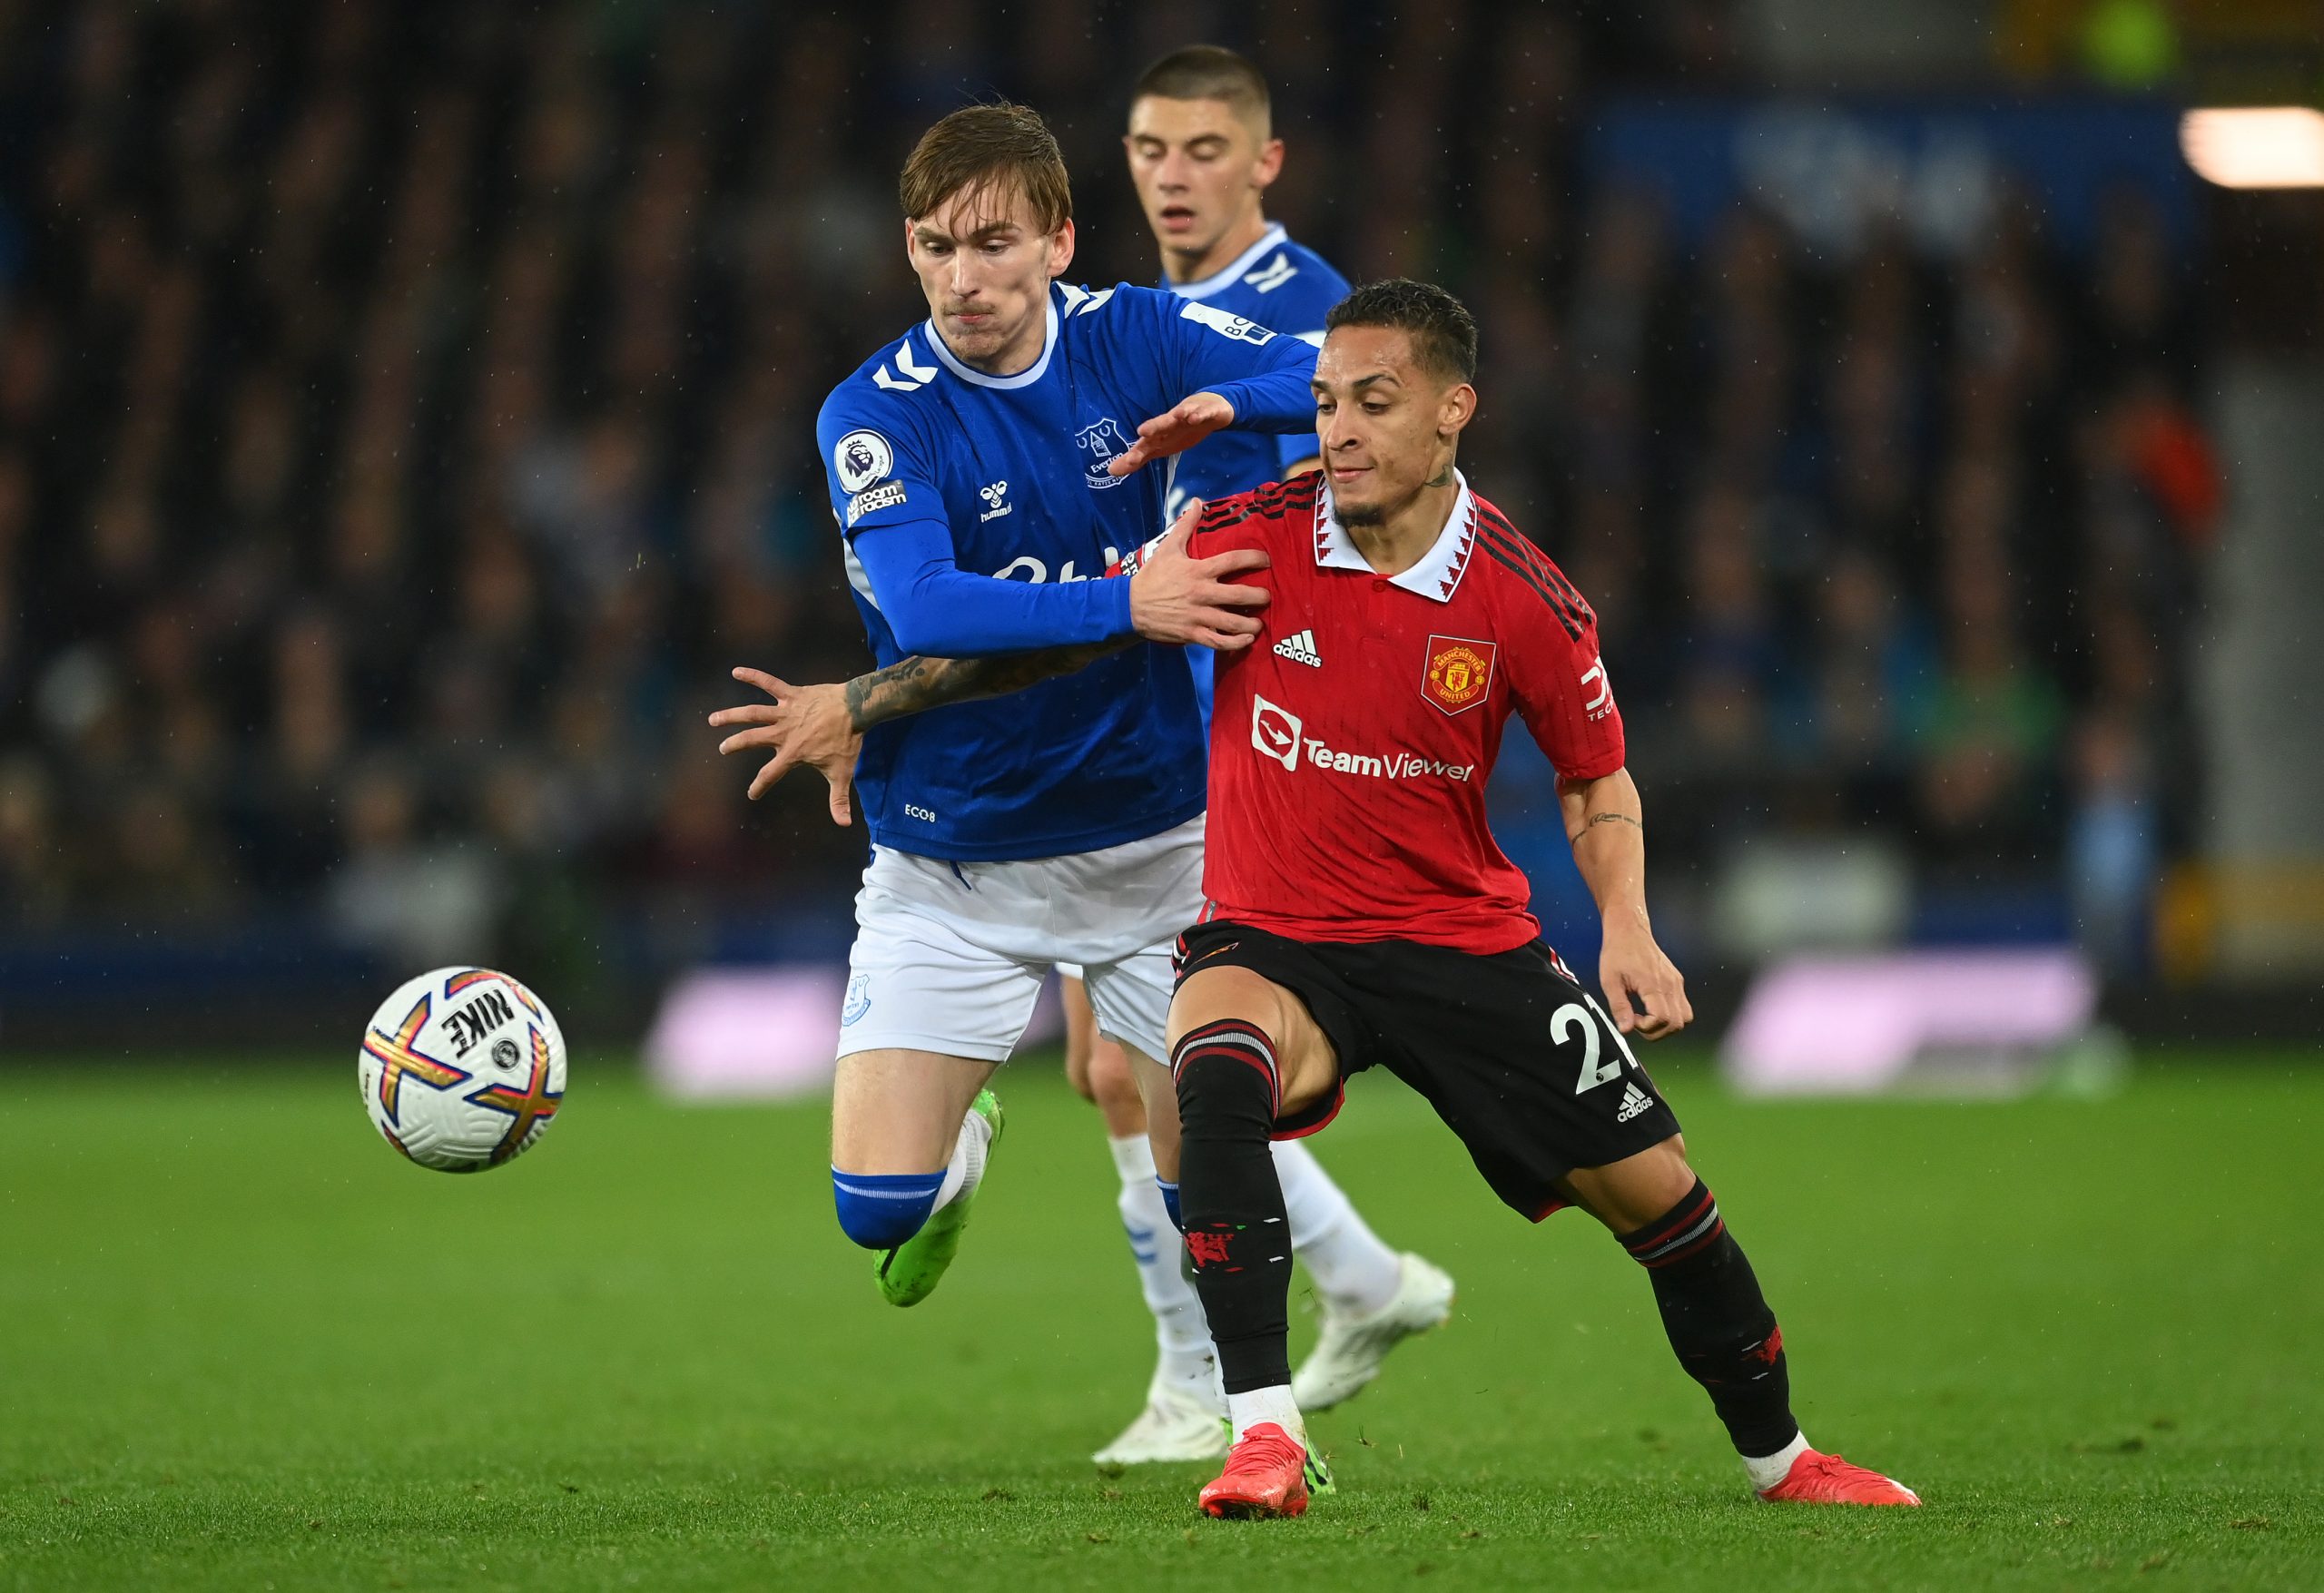 James Garner of Everton battles for possession with Antony of Manchester United during the Premier League match between Everton FC and Manchester United at Goodison Park on October 09, 2022 in Liverpool, England.